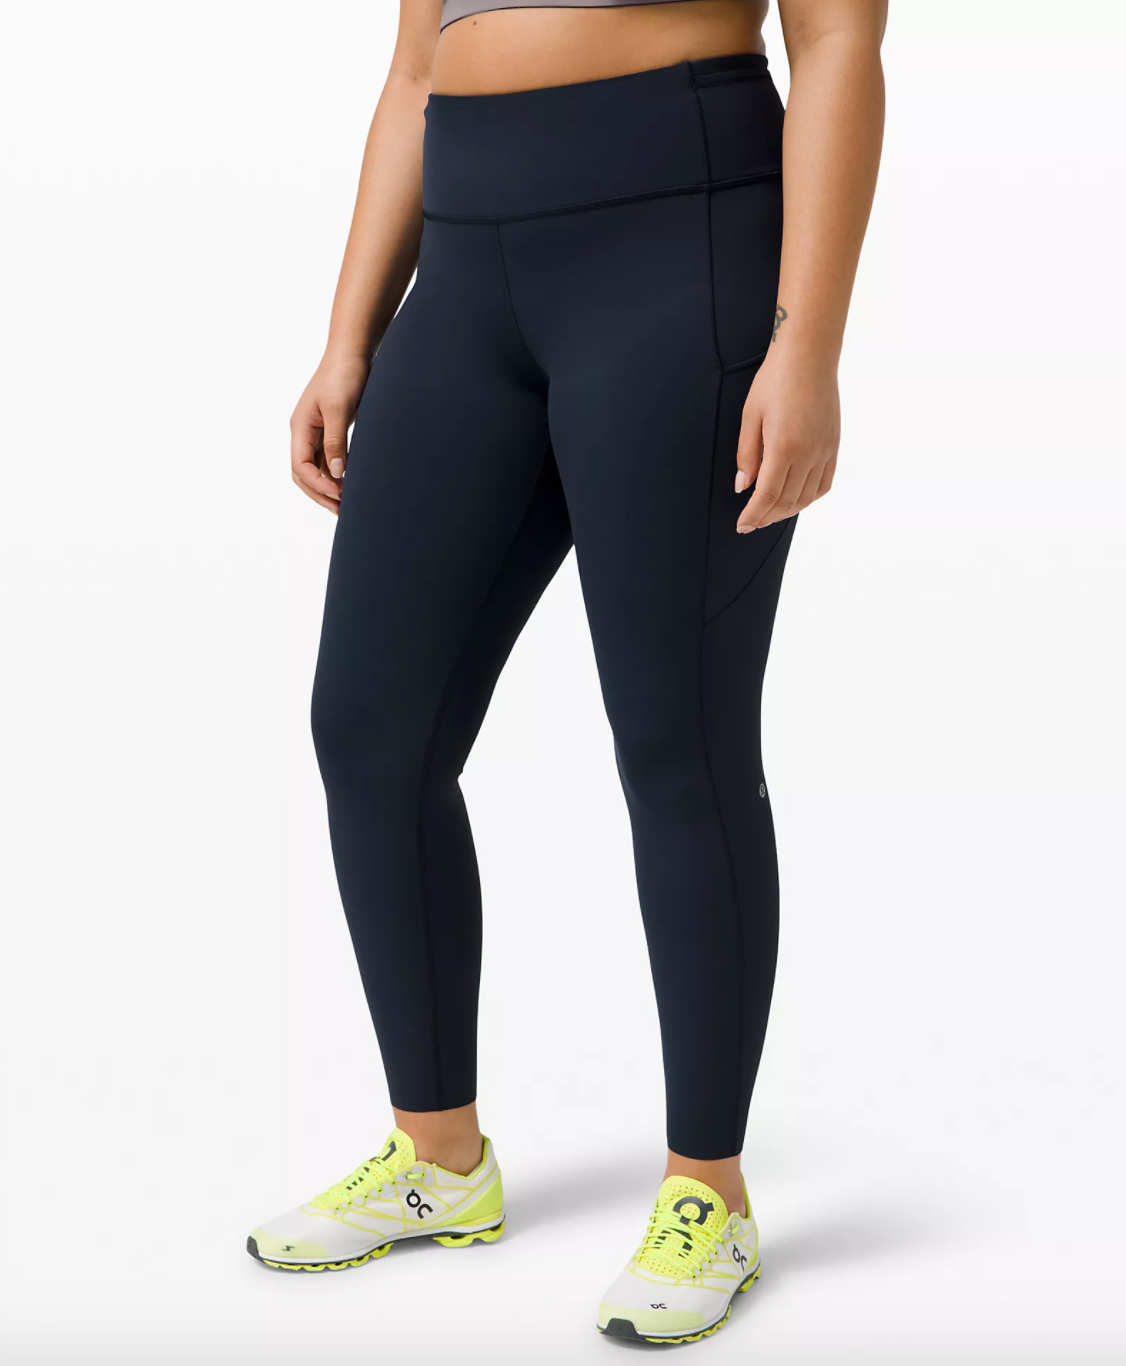 Lululemon Fast and Free High-Rise Tight 28 *Brushed Nulux